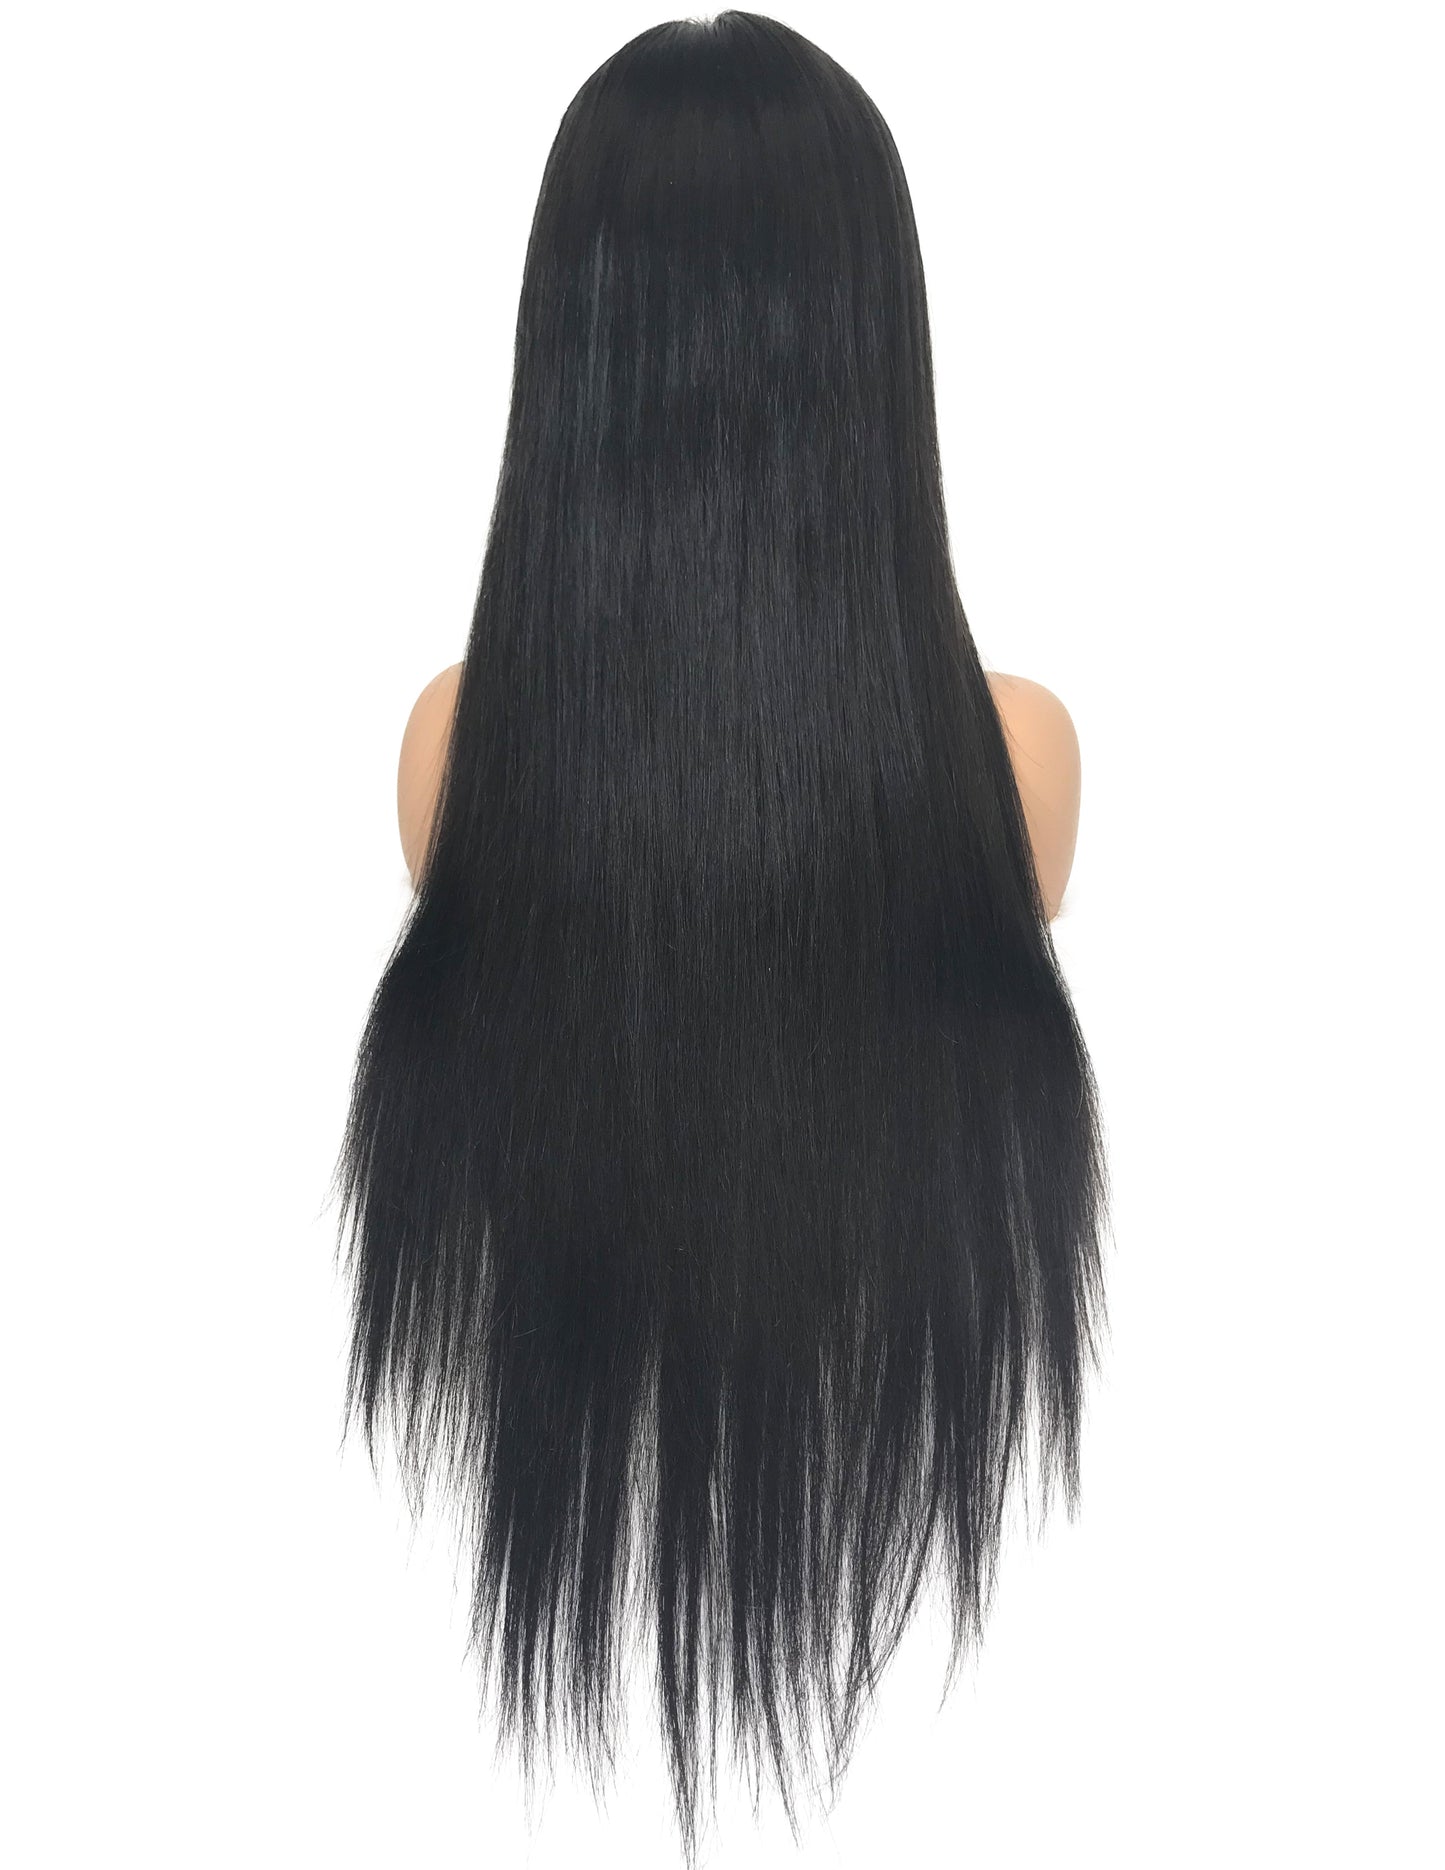 Load image into Gallery viewer, 8A Malaysian Straight Lace Frontal Human Hair Wig - eHair Outlet
